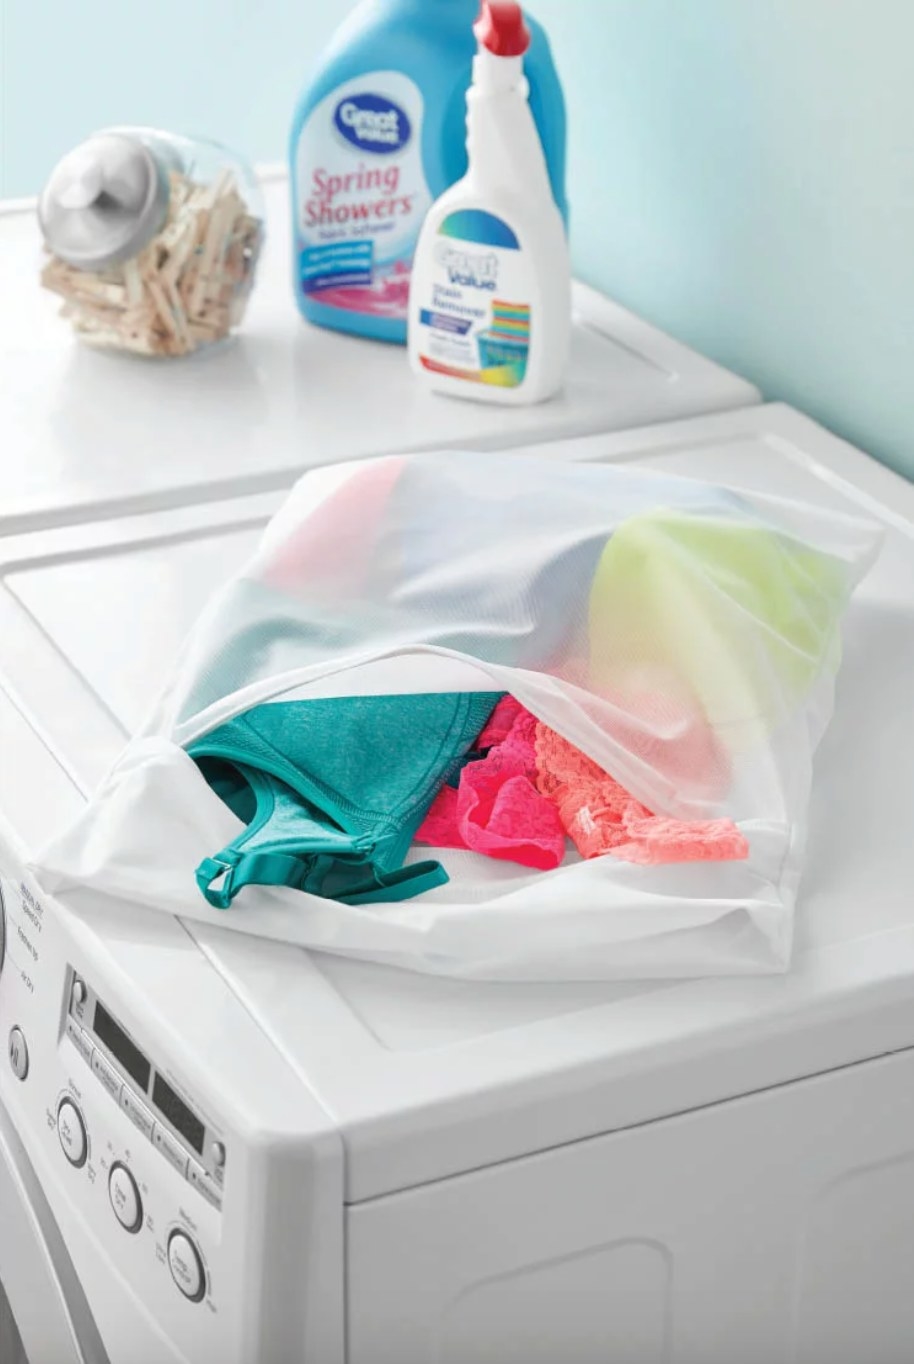 the white mesh bag filled with brightly colored undergarments on top of a white washing machine